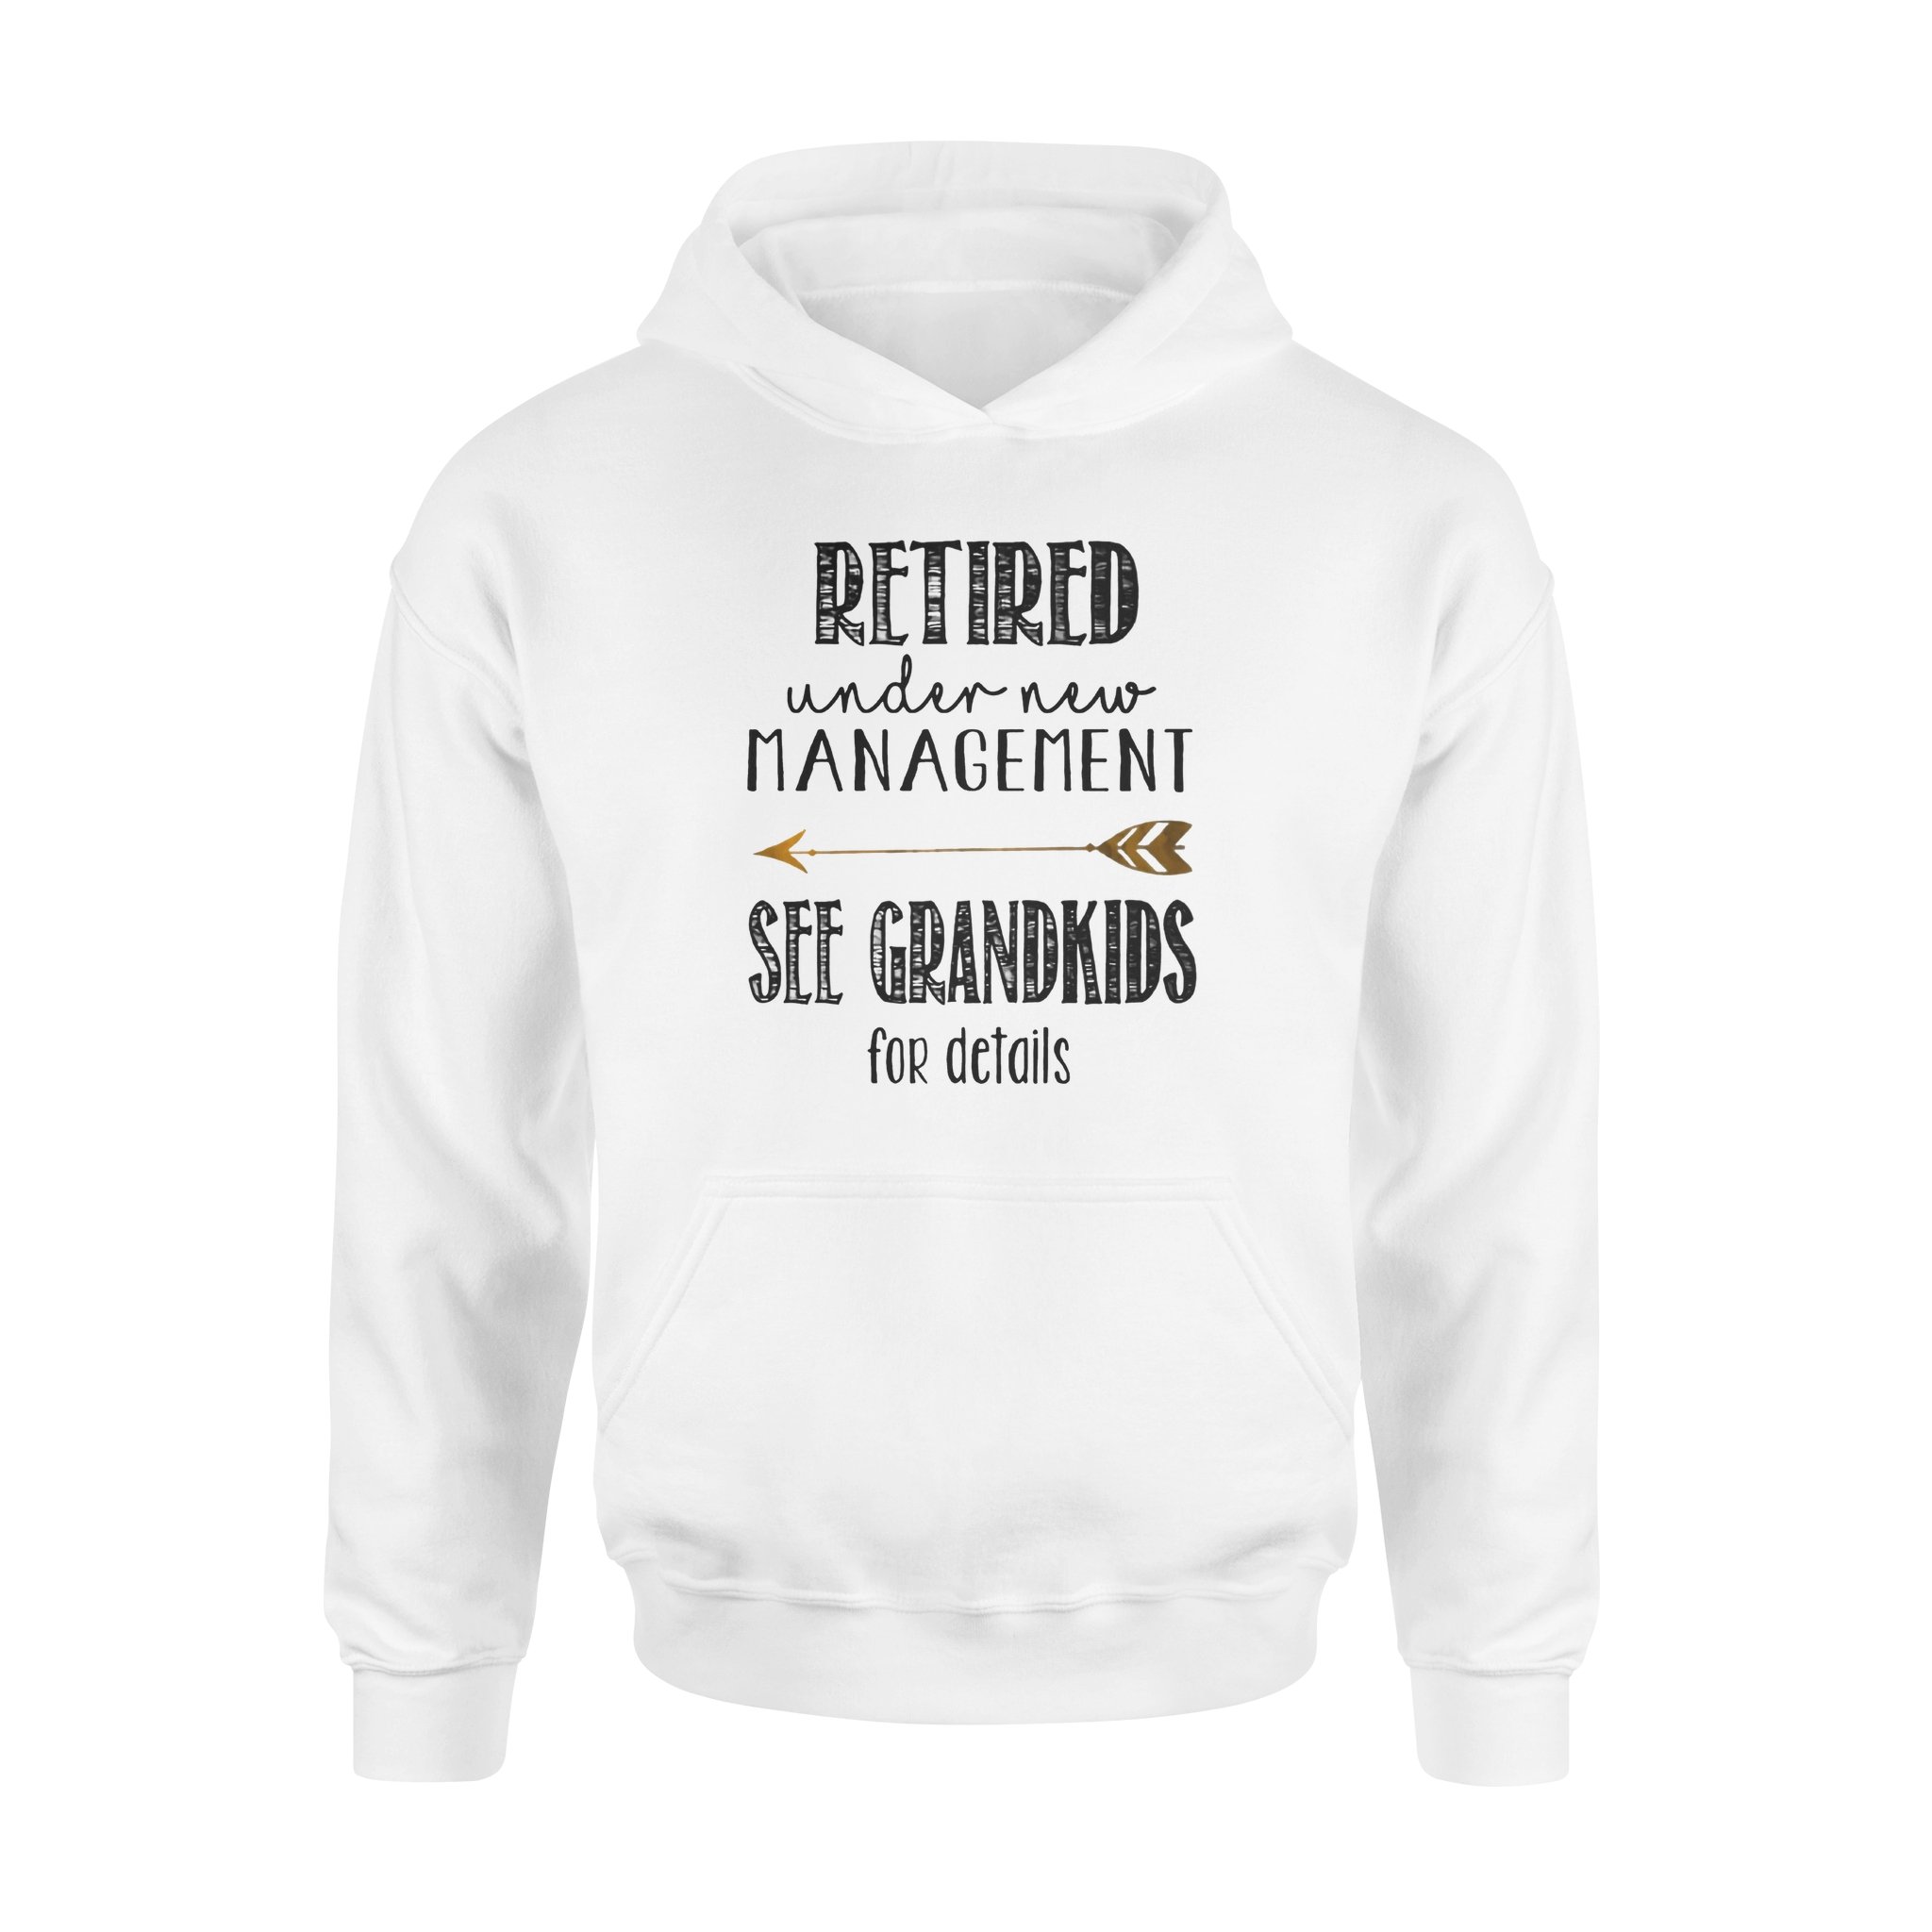 RETIRED UNDER NEW MANAGEMENT SEE GRANDKIDS FOR DETAILS, GIFTS FOR GRANDPA,GRANDPA SHIRT,GRANDPA GIFTS,FATHER?S DAY GIFT,PLUS SIZE SHIRT